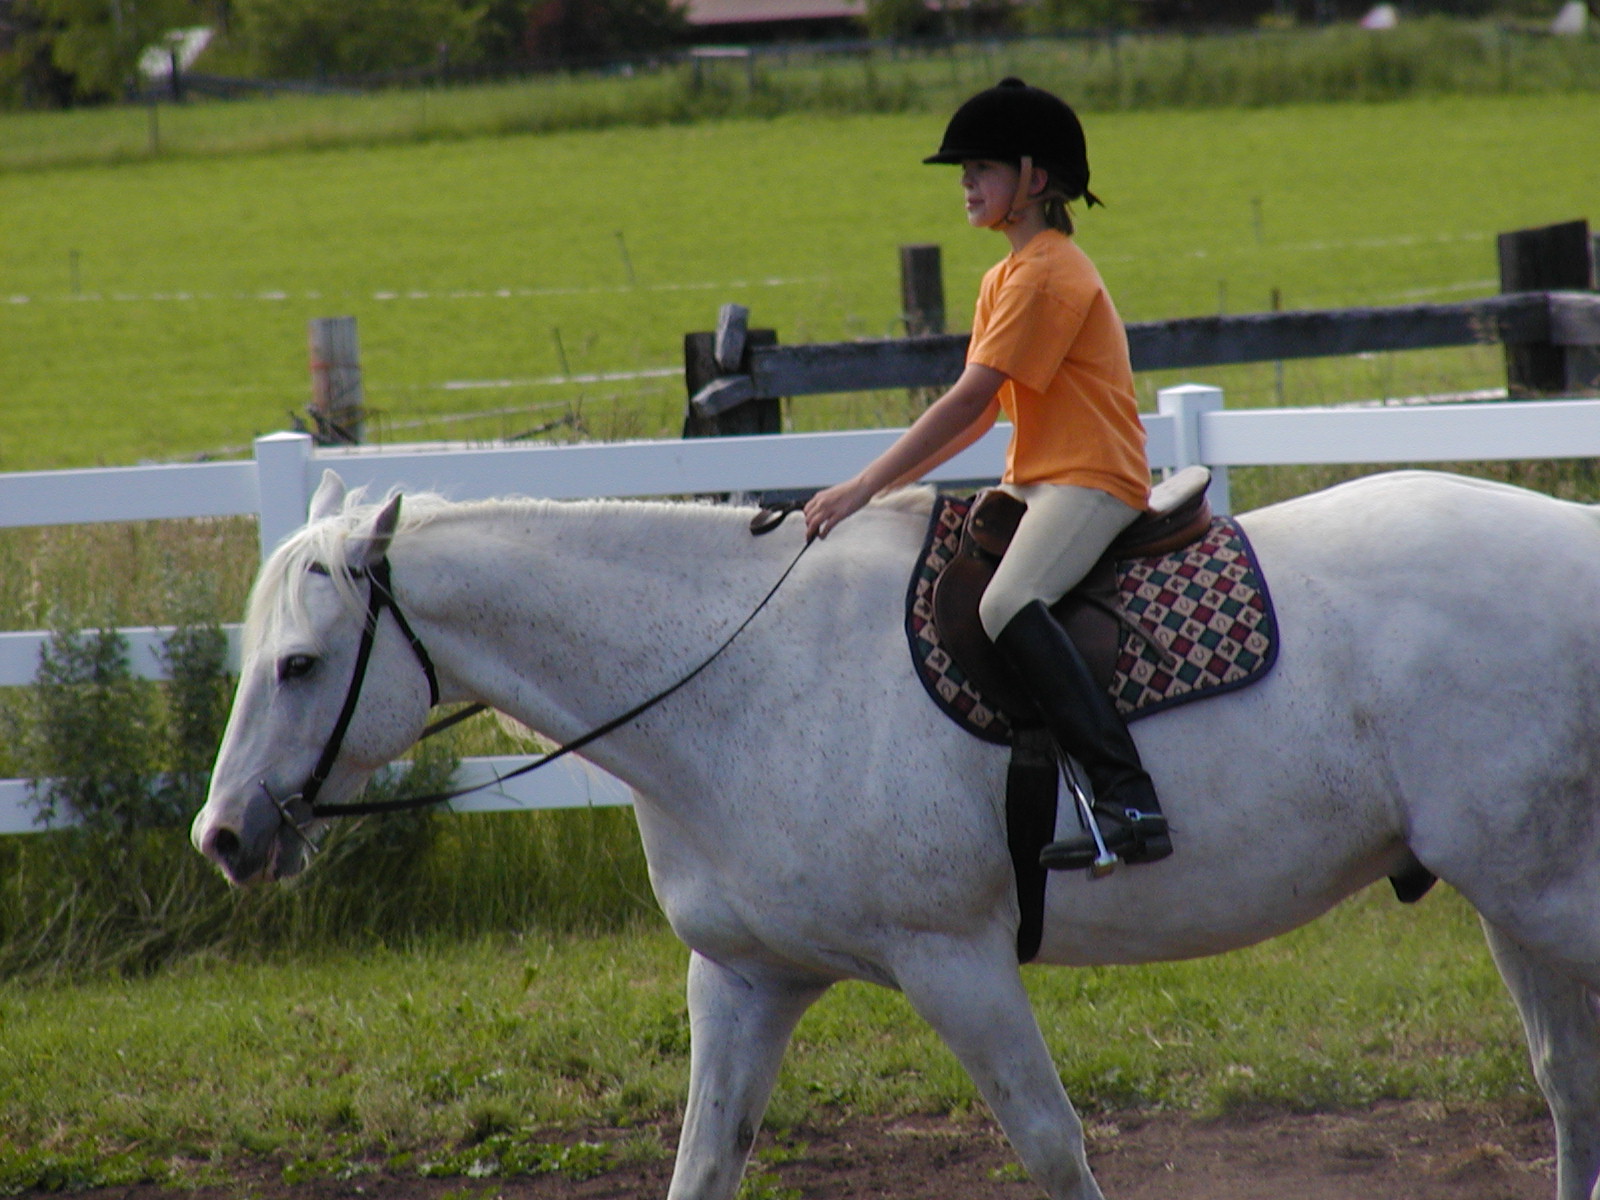 Our little girl who loves horses and is not afraid of them gets to steer a course on Whitey